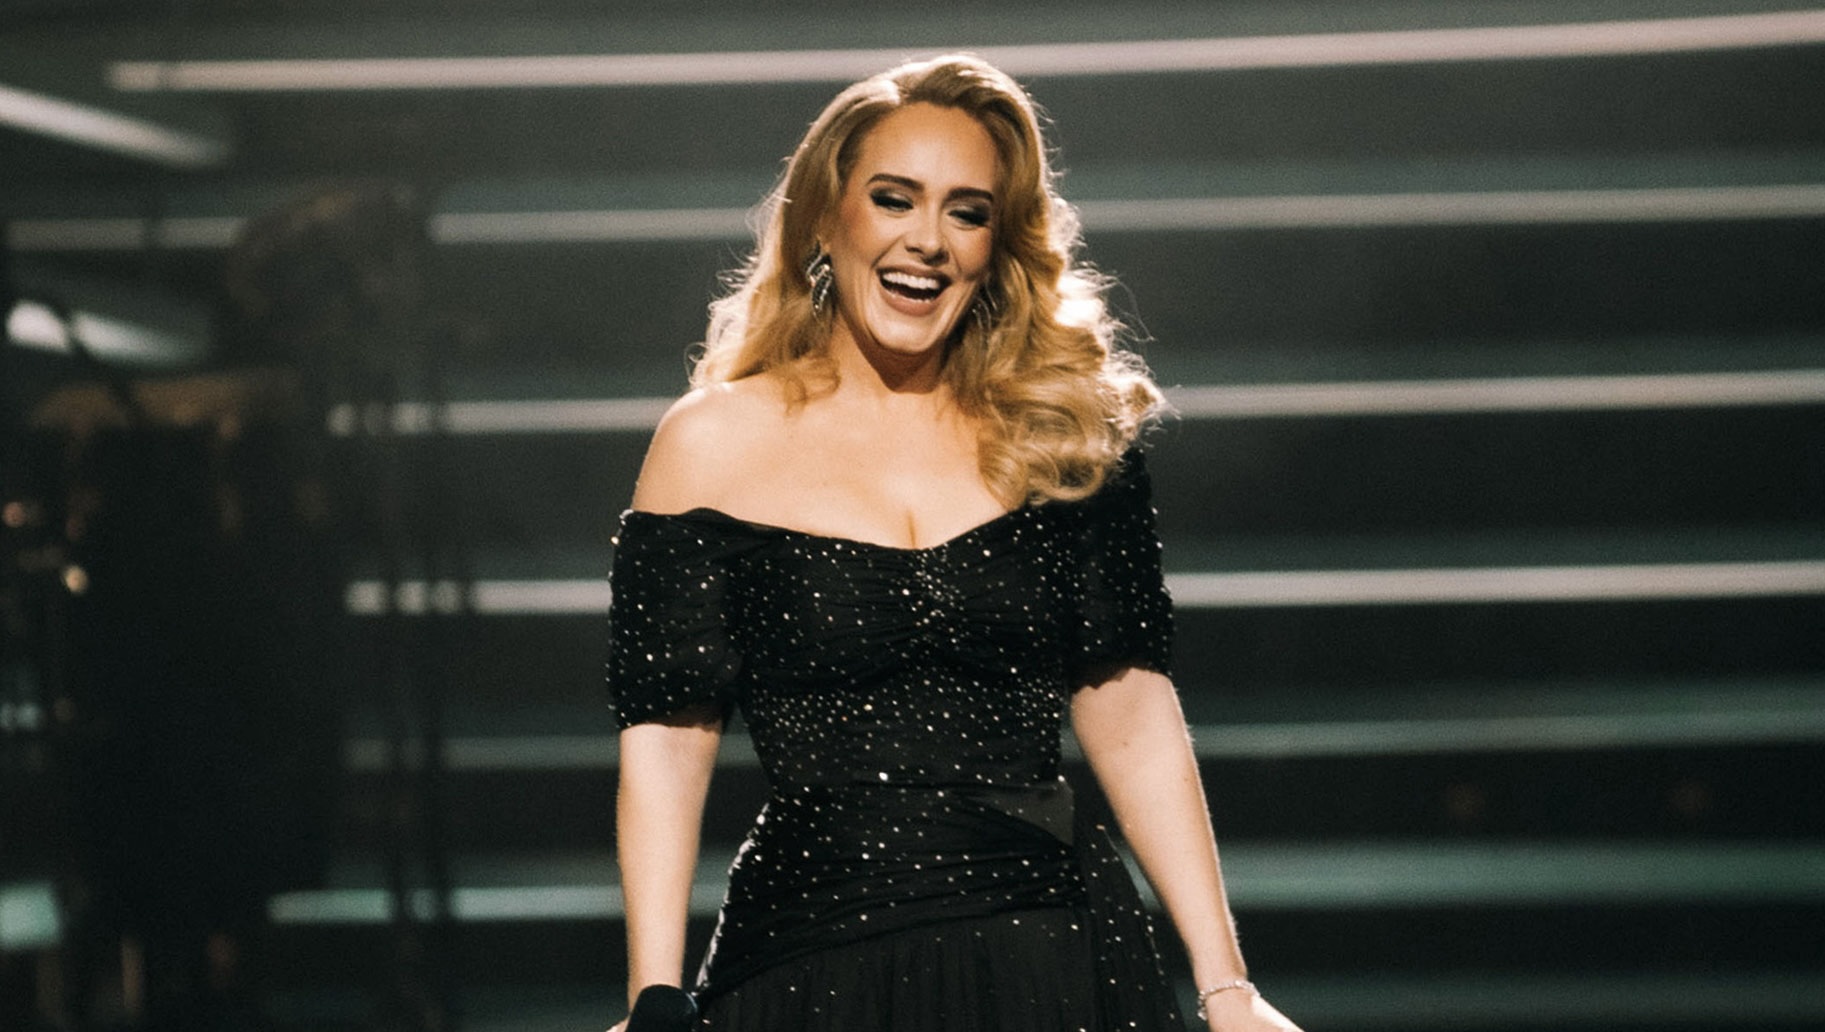 Adele Confirms That She Will Tour After Her Next Album Is Released, But Doesn’t Know Just When That Will Be